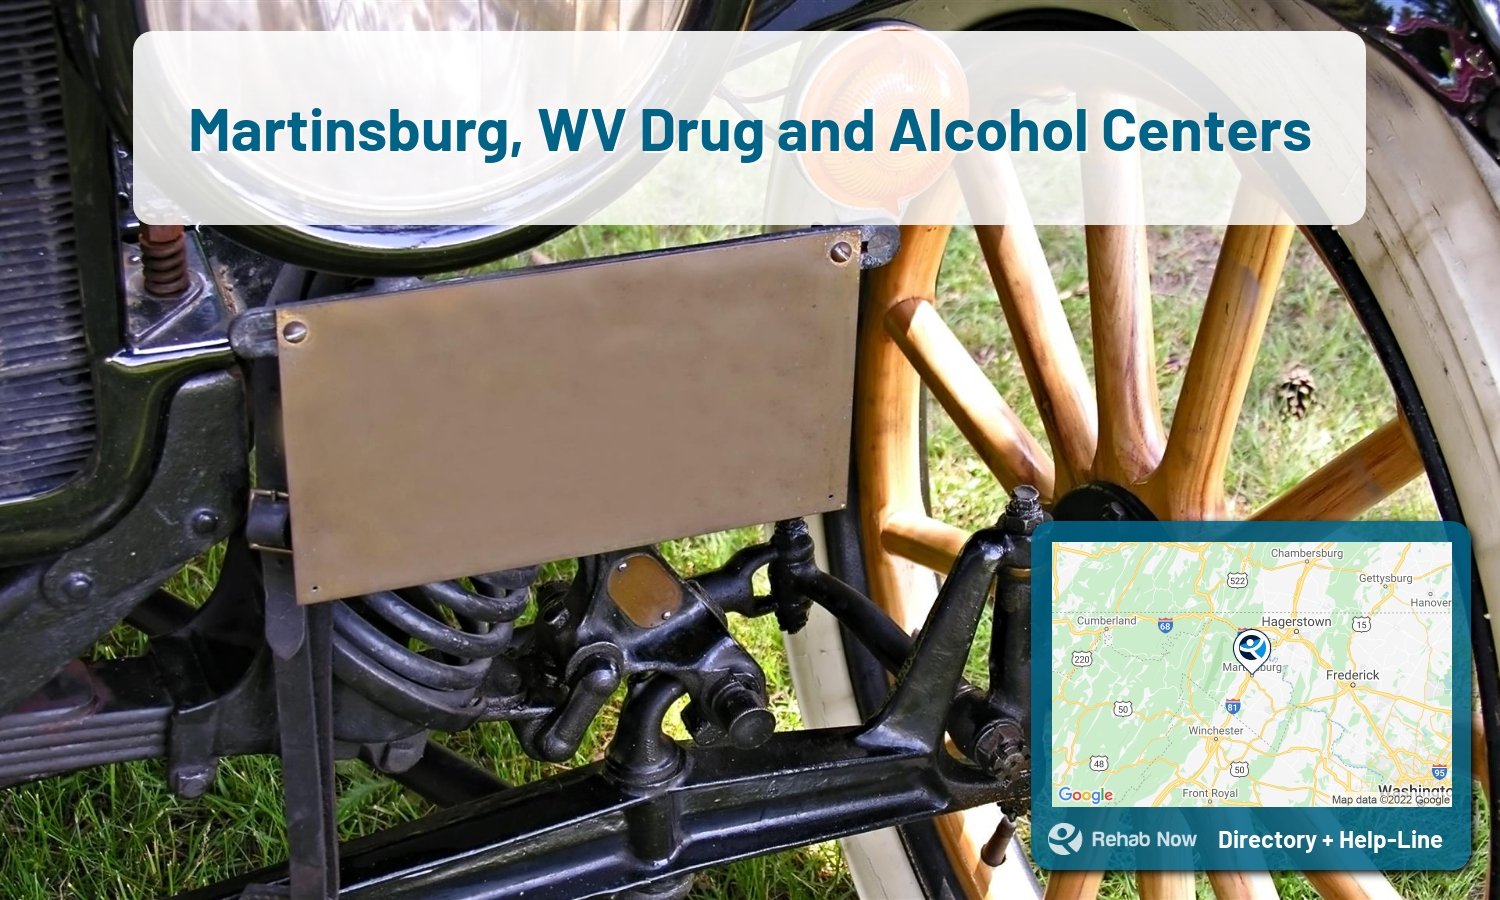 Martinsburg, WV Treatment Centers. Find drug rehab in Martinsburg, West Virginia, or detox and treatment programs. Get the right help now!